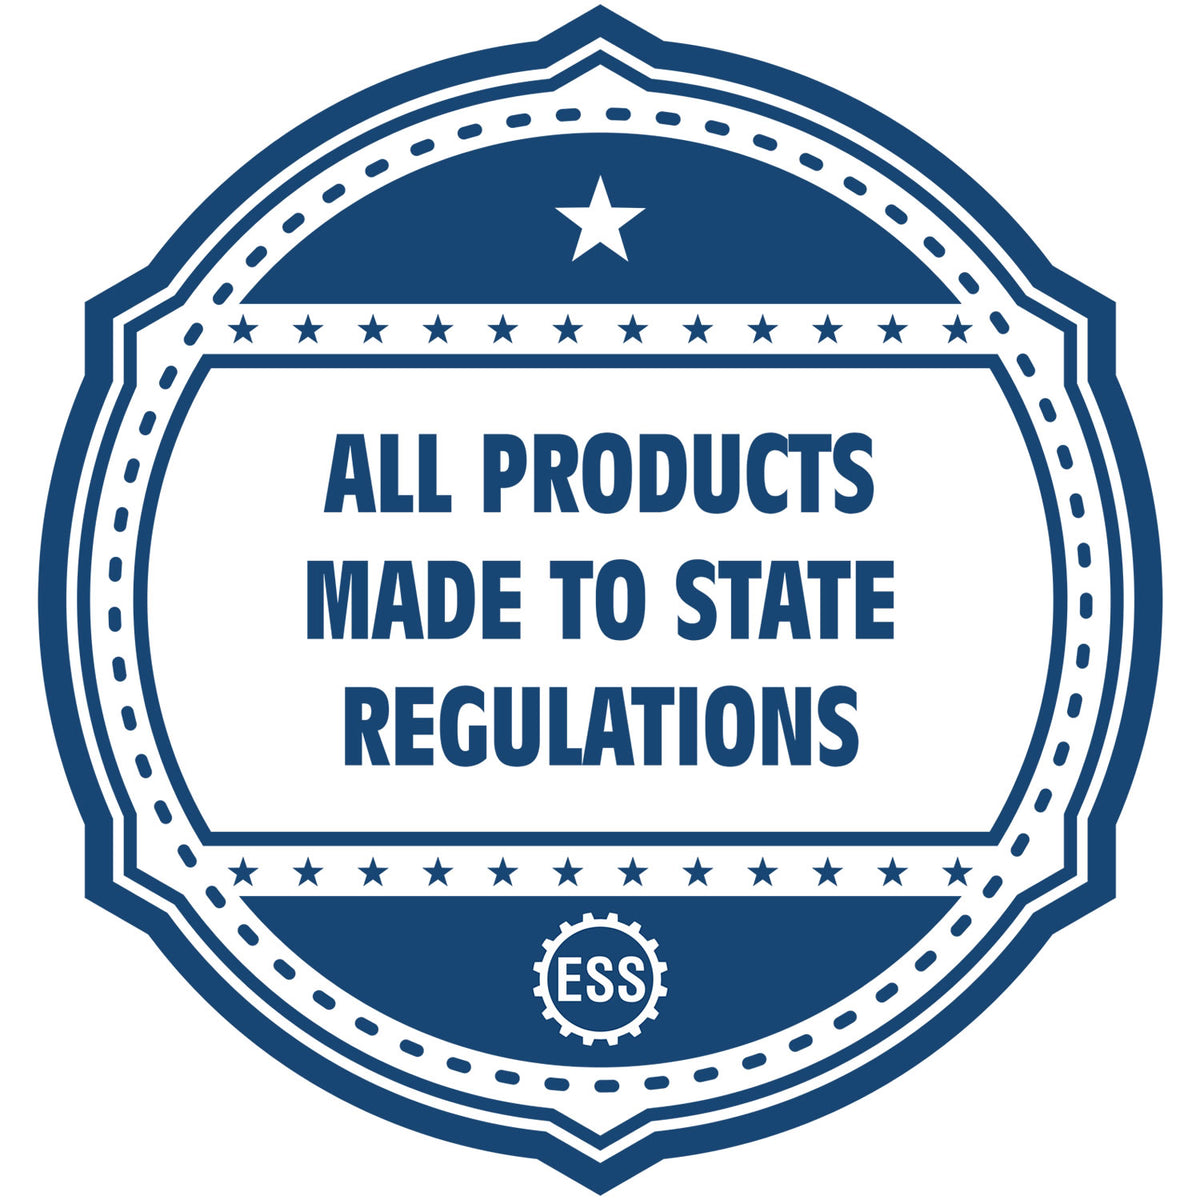 A blue icon or badge for the Heavy Duty Cast Iron Michigan Geologist Seal Embosser showing that this product is made in compliance with state regulations.